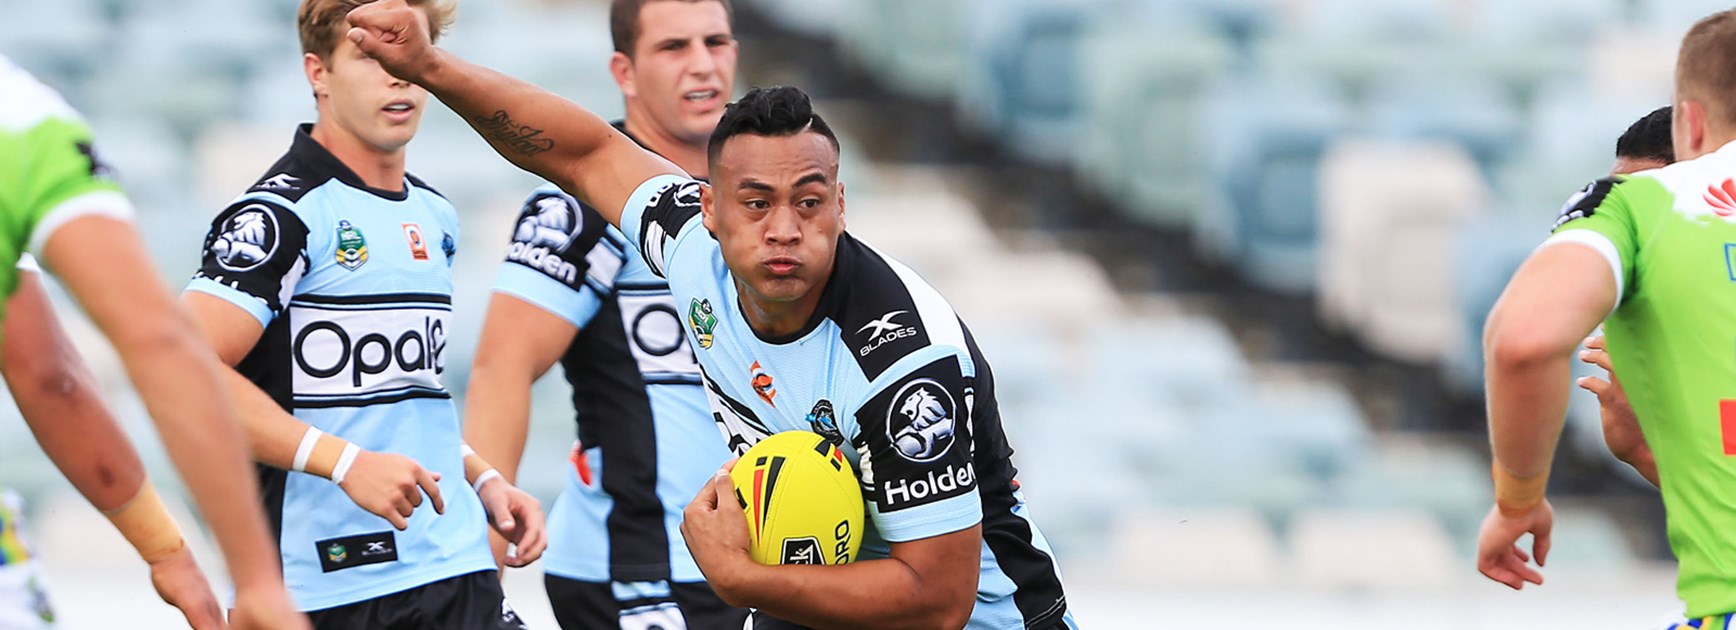 The Sharks racked up a massive 74-12 scoreline against Canberra in the NYC this weekend.